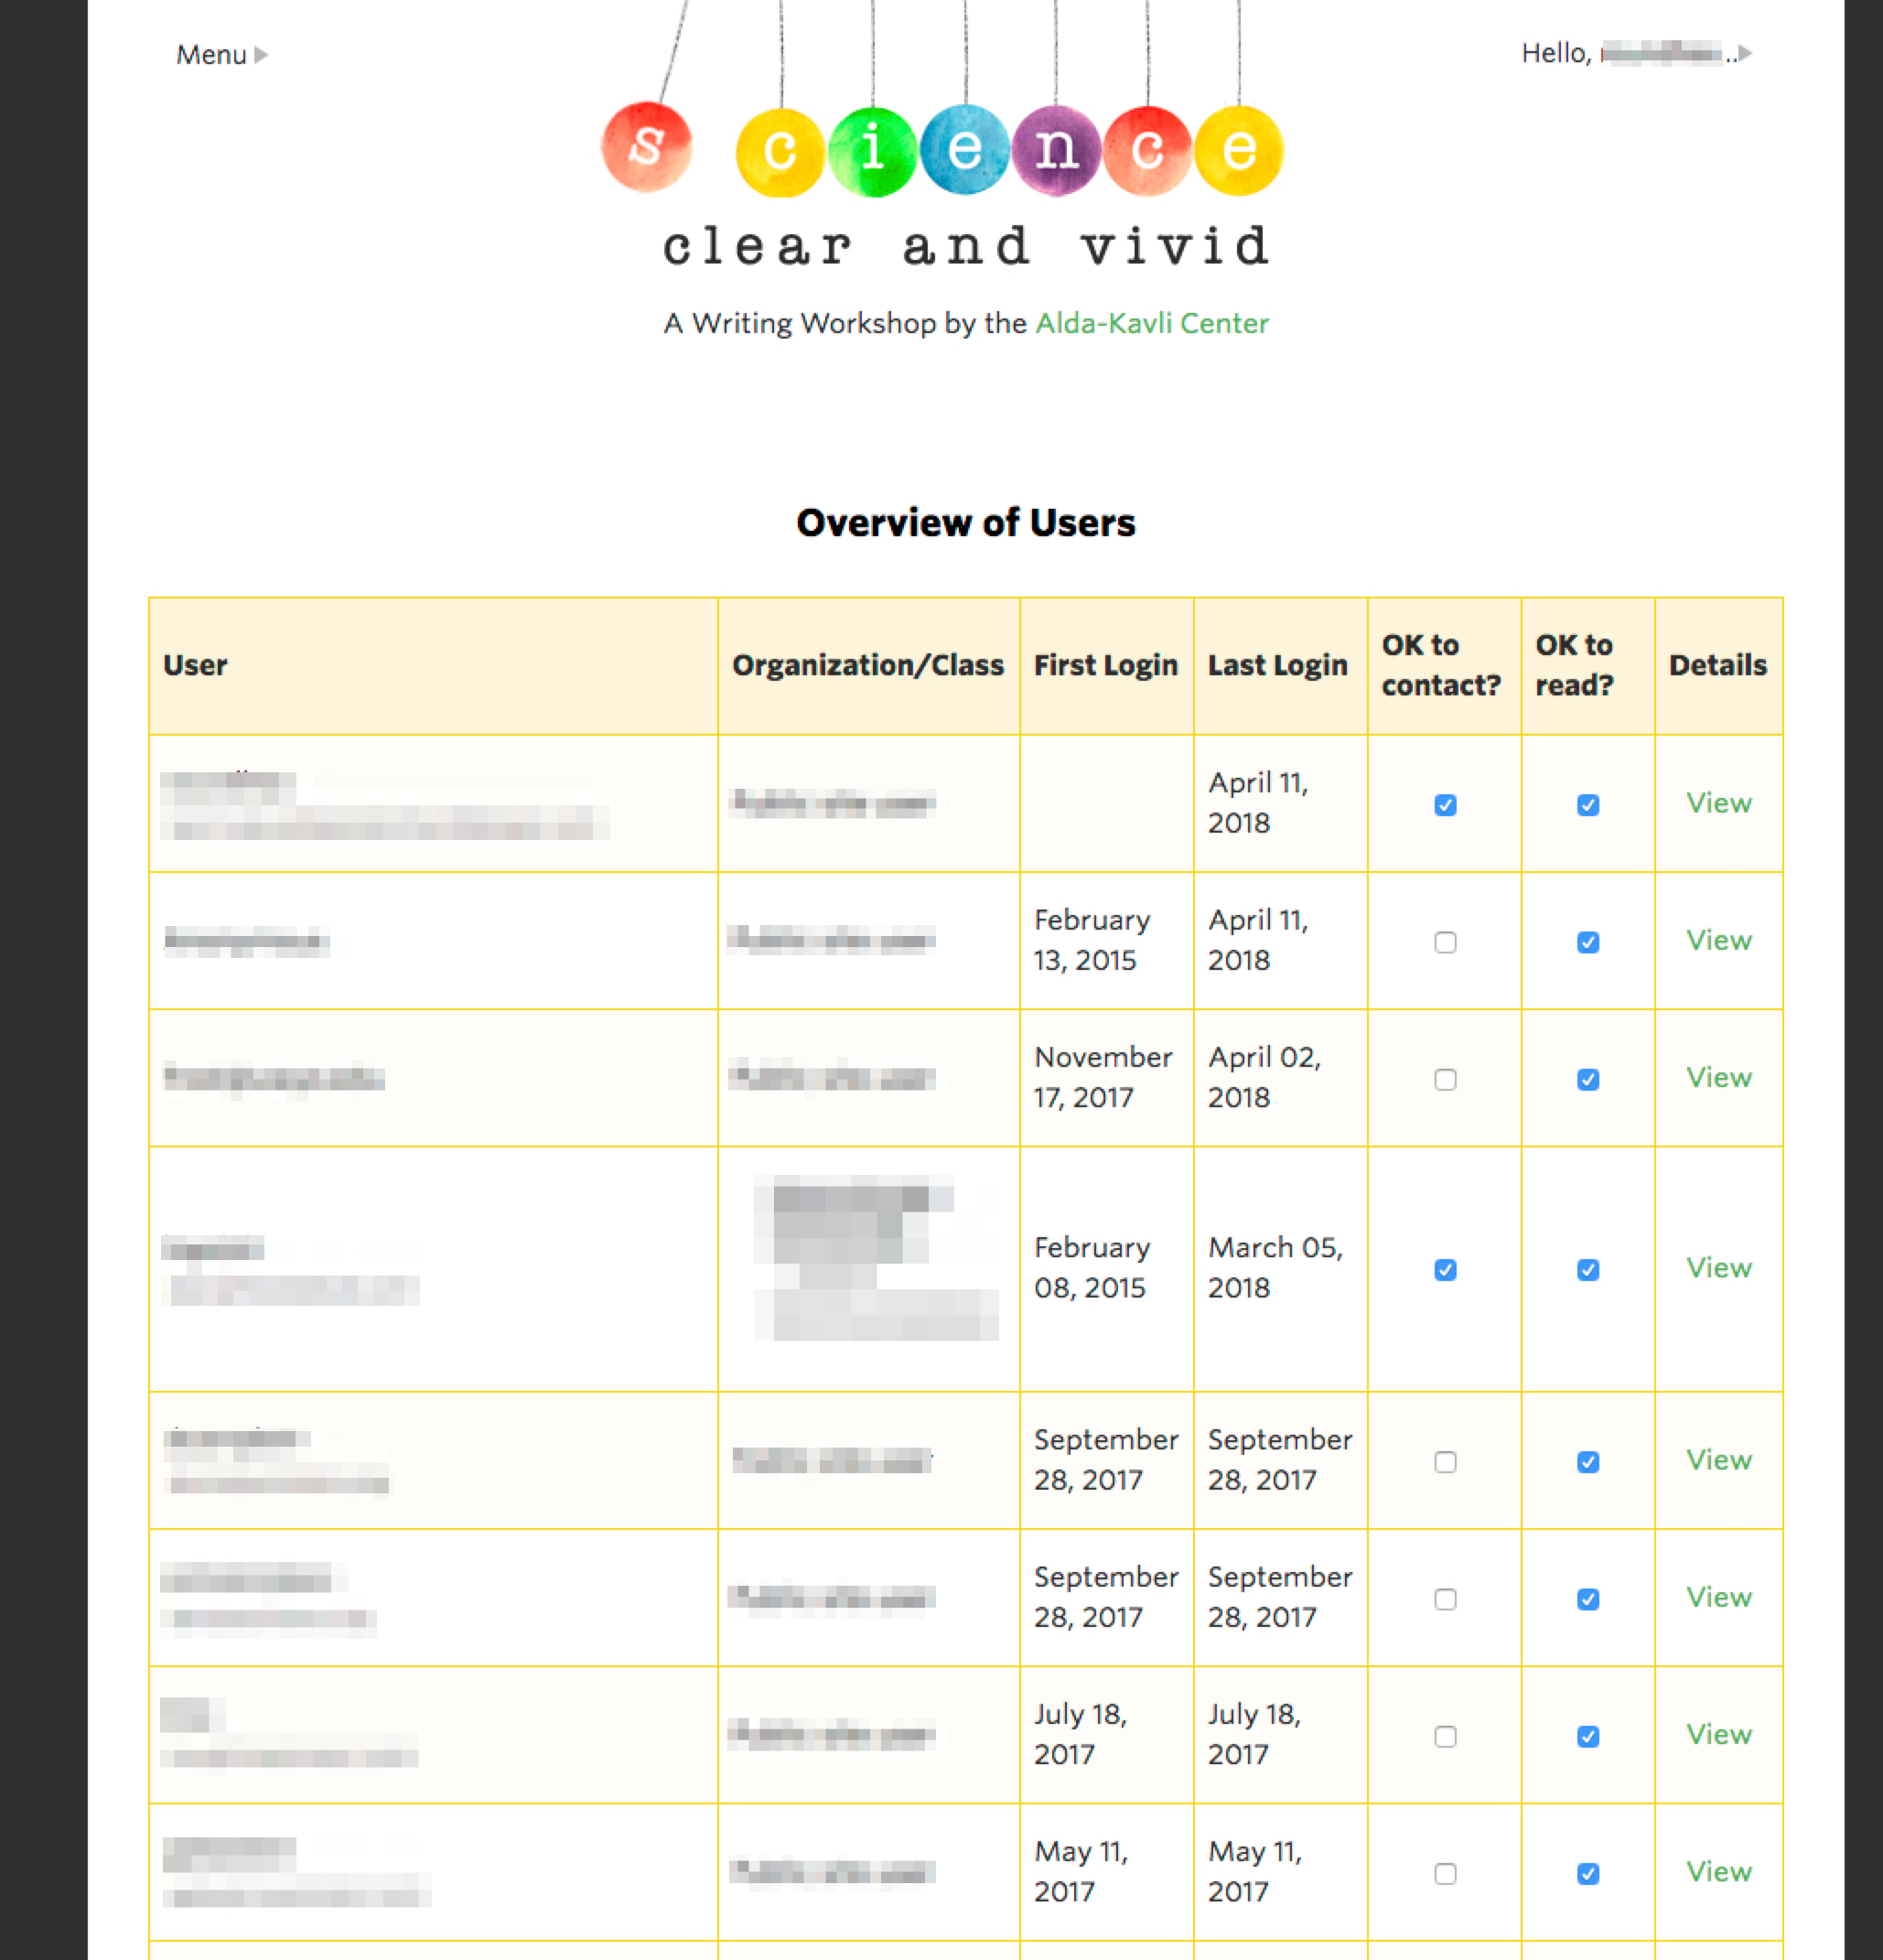 Teacher/Admin interface to track students/users.